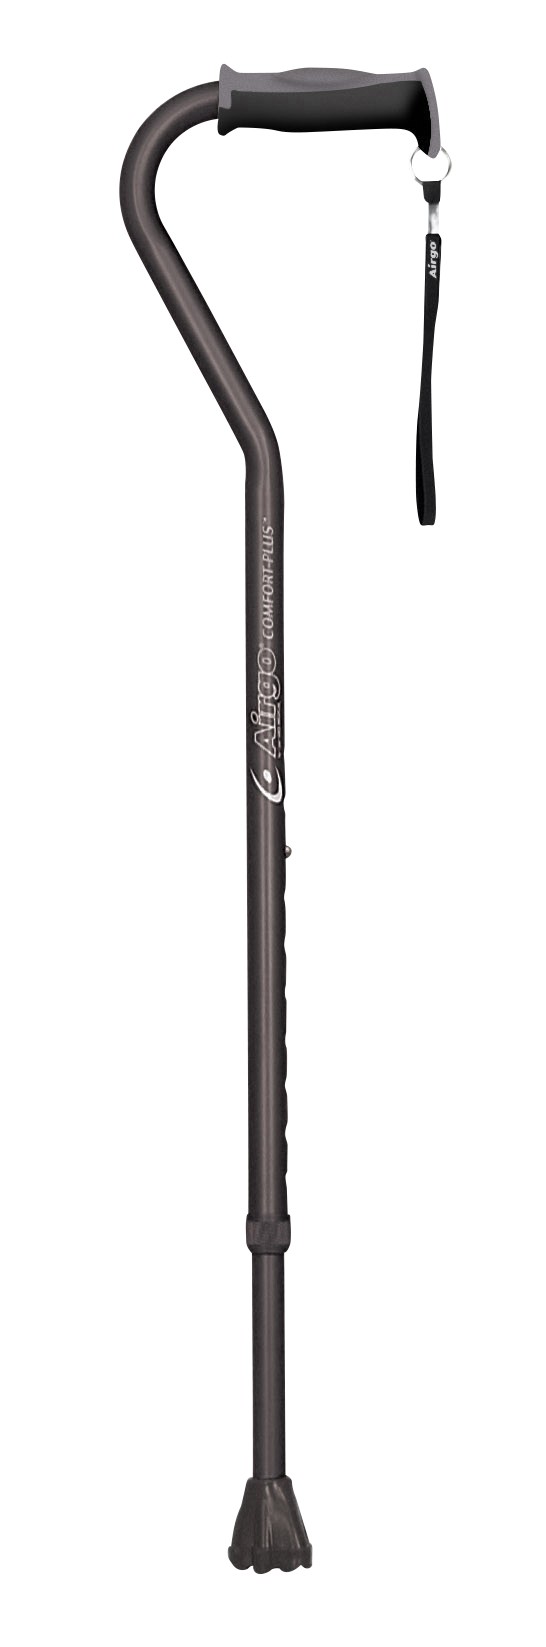 Drive Medical Airgo Offset Cane, Black $24.41/Each Drive Medical  730-444-(Canada Only)